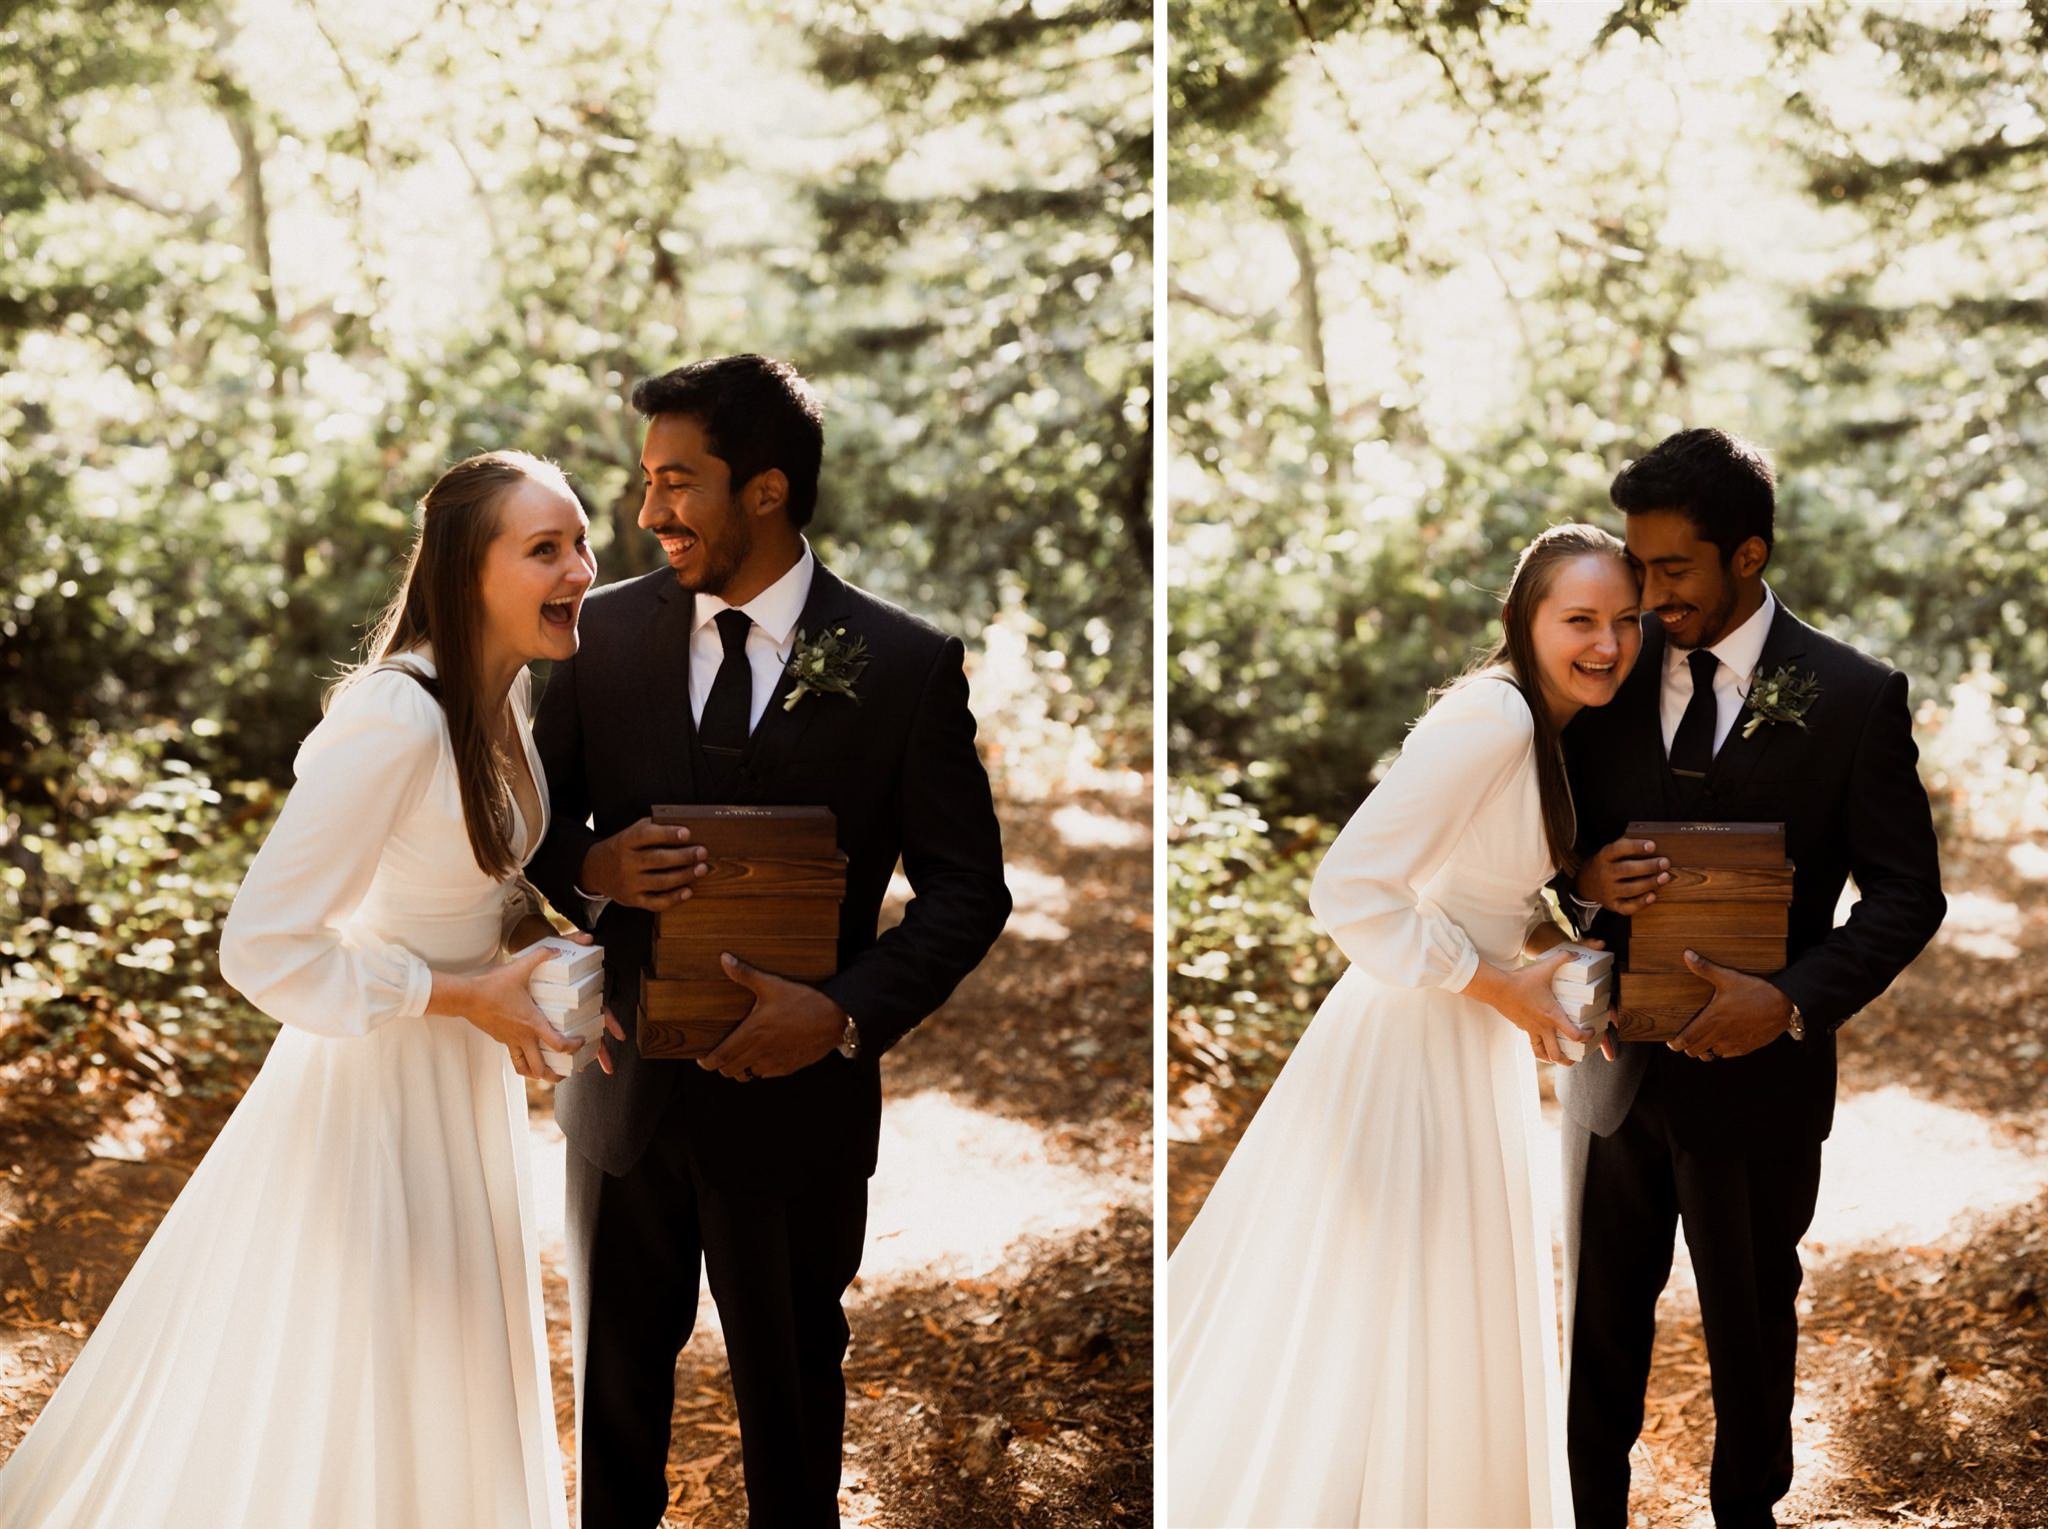 049_Two-Day Big Sur Redwoods Elopement with Family_Will Khoury Elopement Photographer.jpg